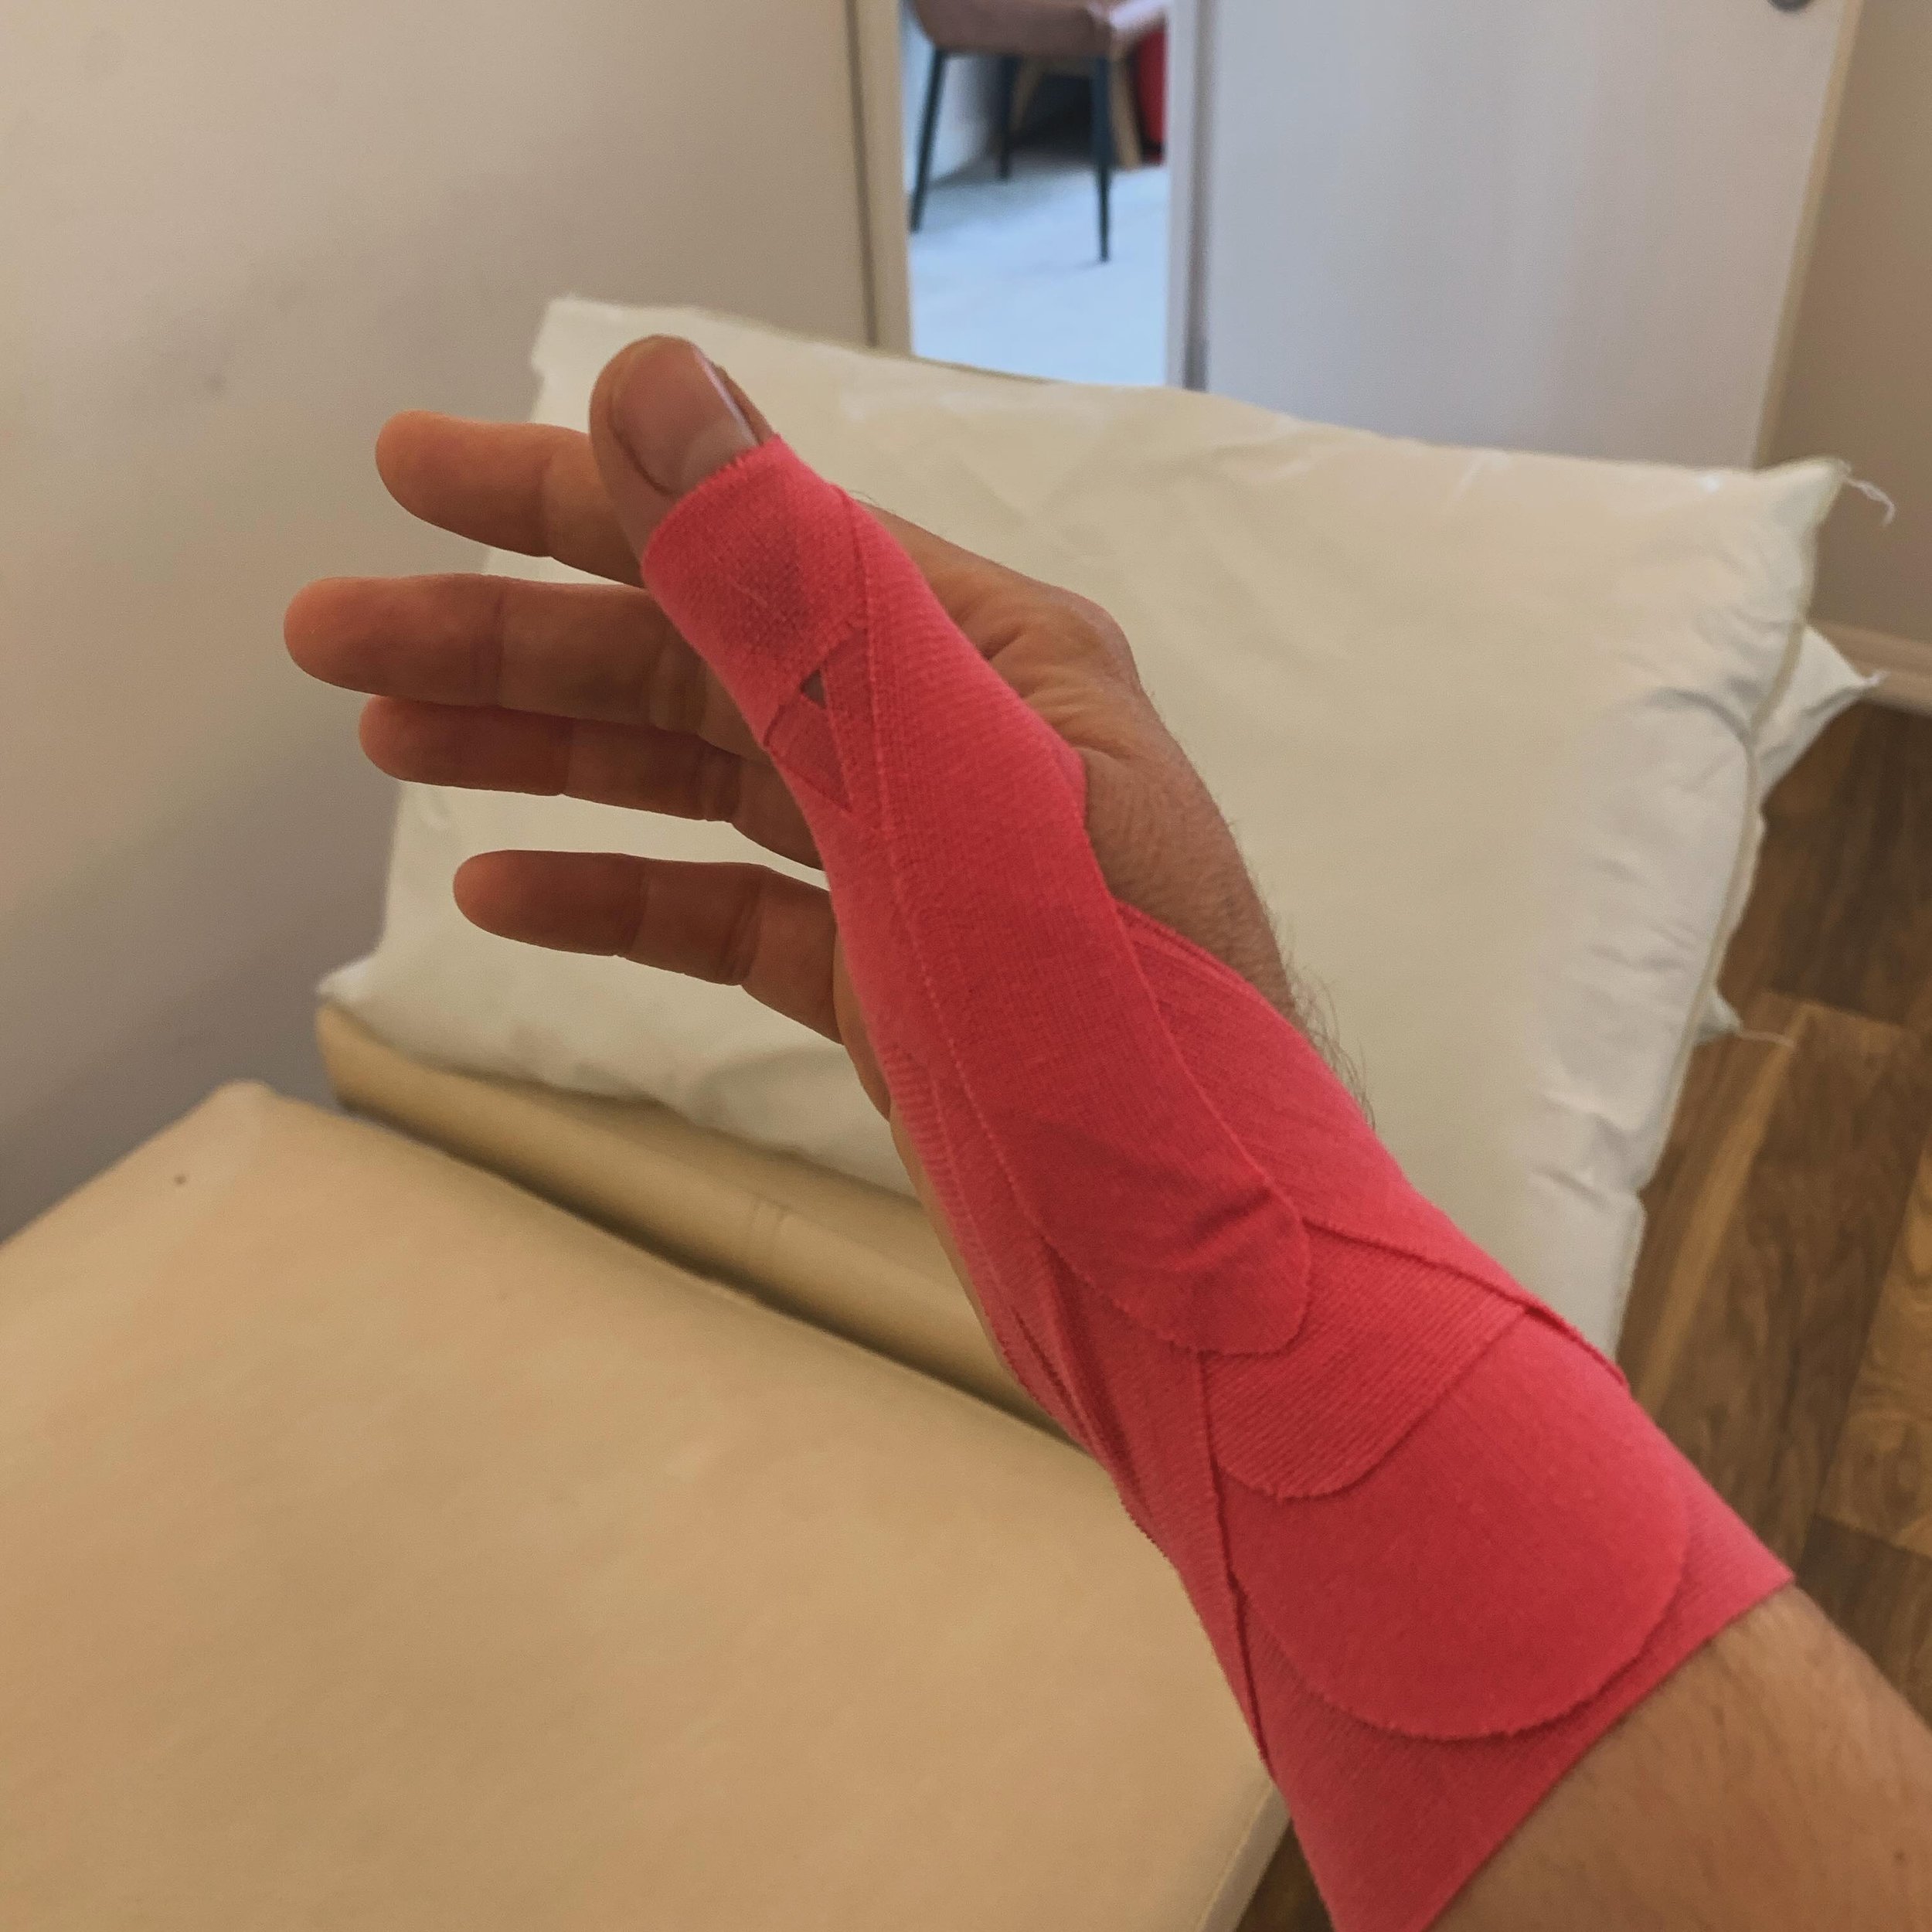 T A P I N G  can be used to support strained joints, prevent further injury and off-load muscles/ligaments and tendons.

Here is Claire&rsquo;s thumb taped up with kinesio tape @sporttape the other week after she fell off a tree swing and managed to 